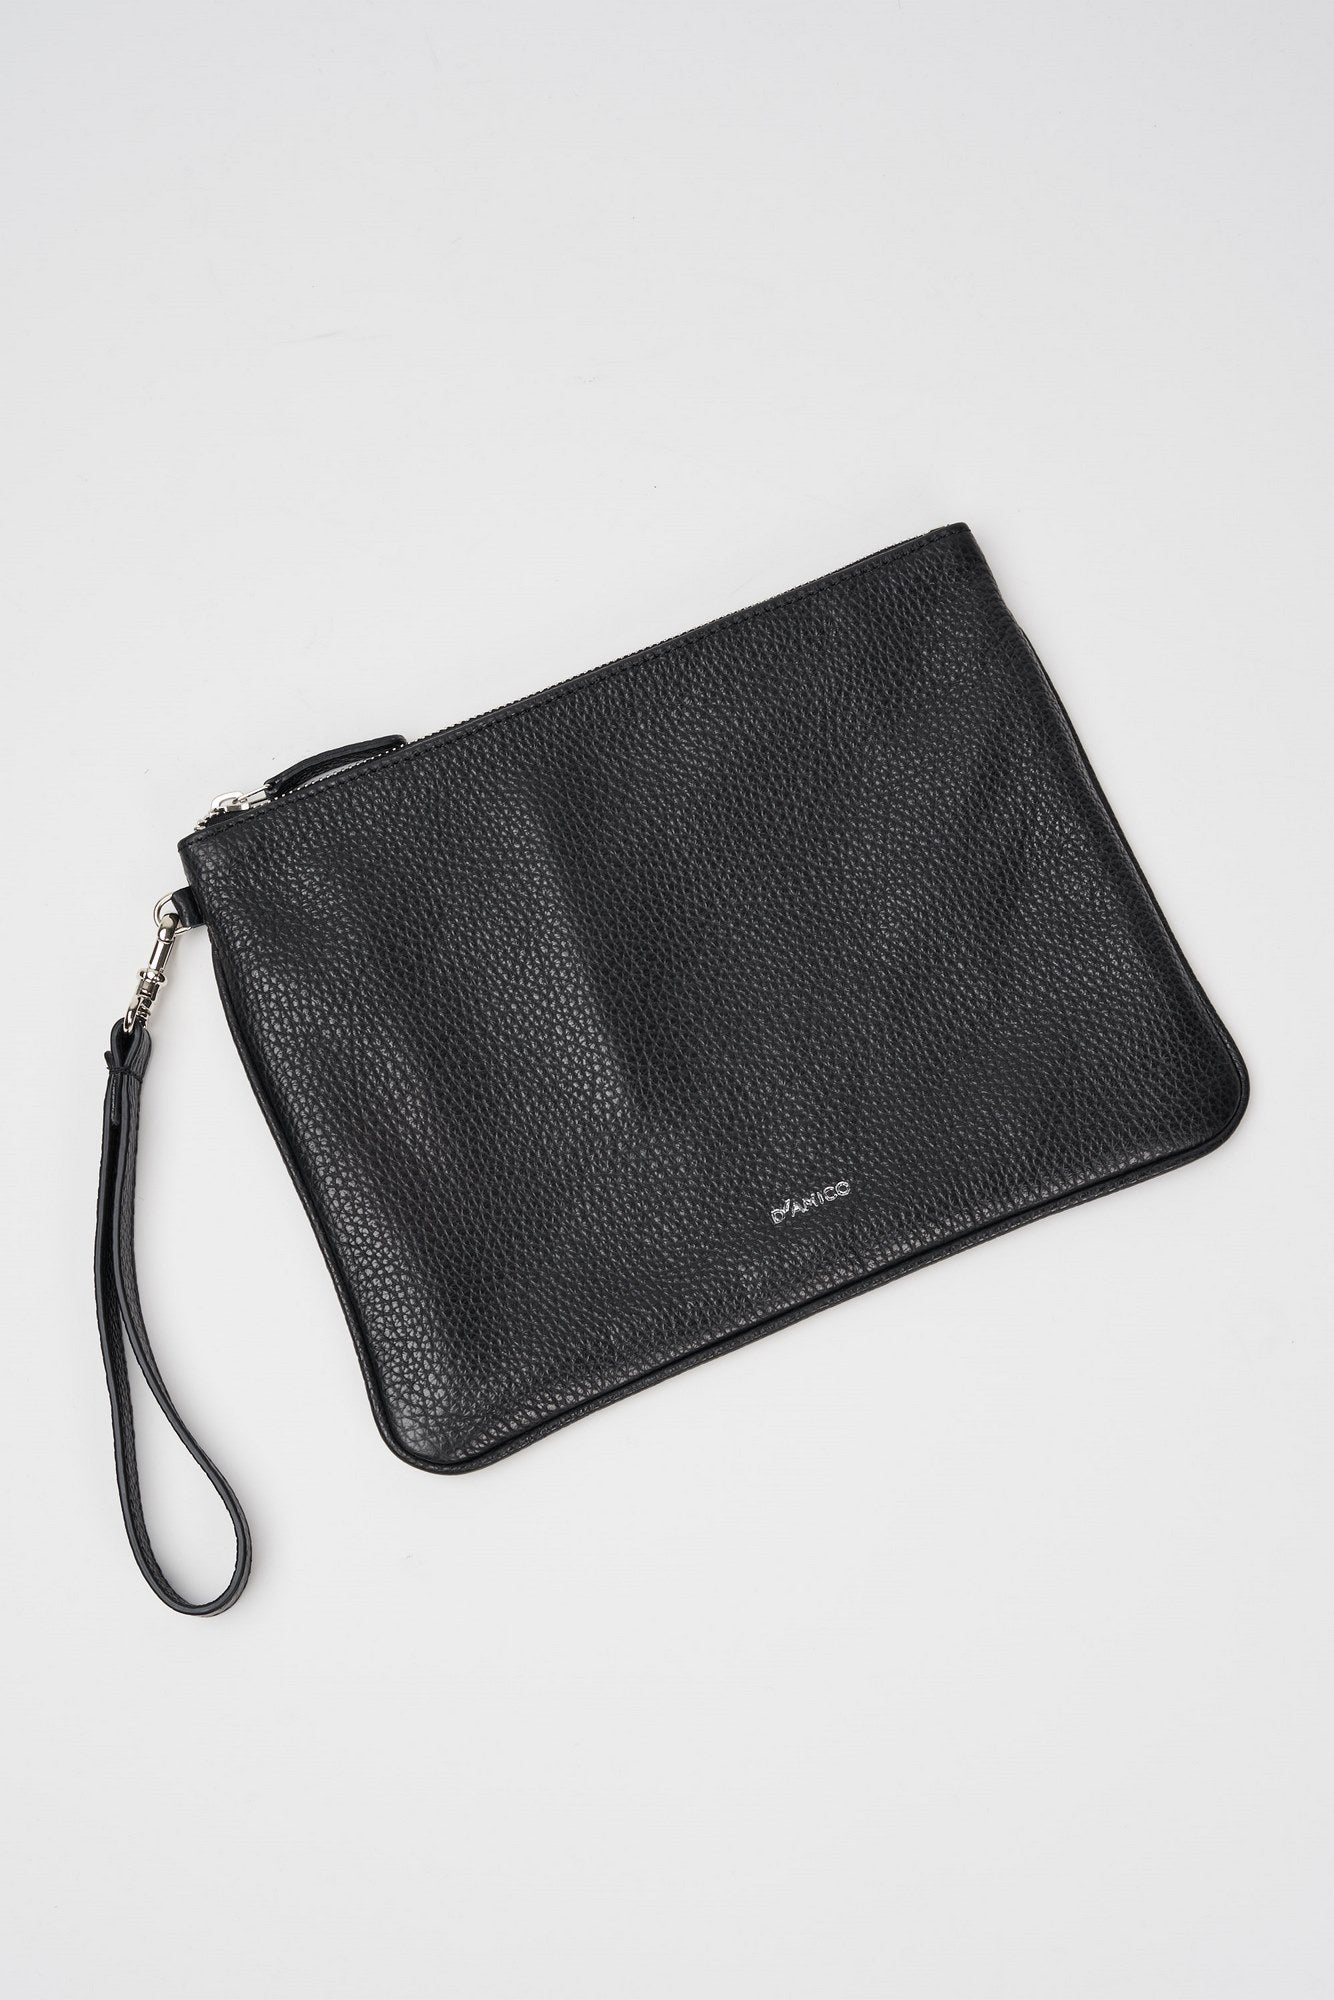 D'Amico Clutch 6282 in Textured Leather Black-1